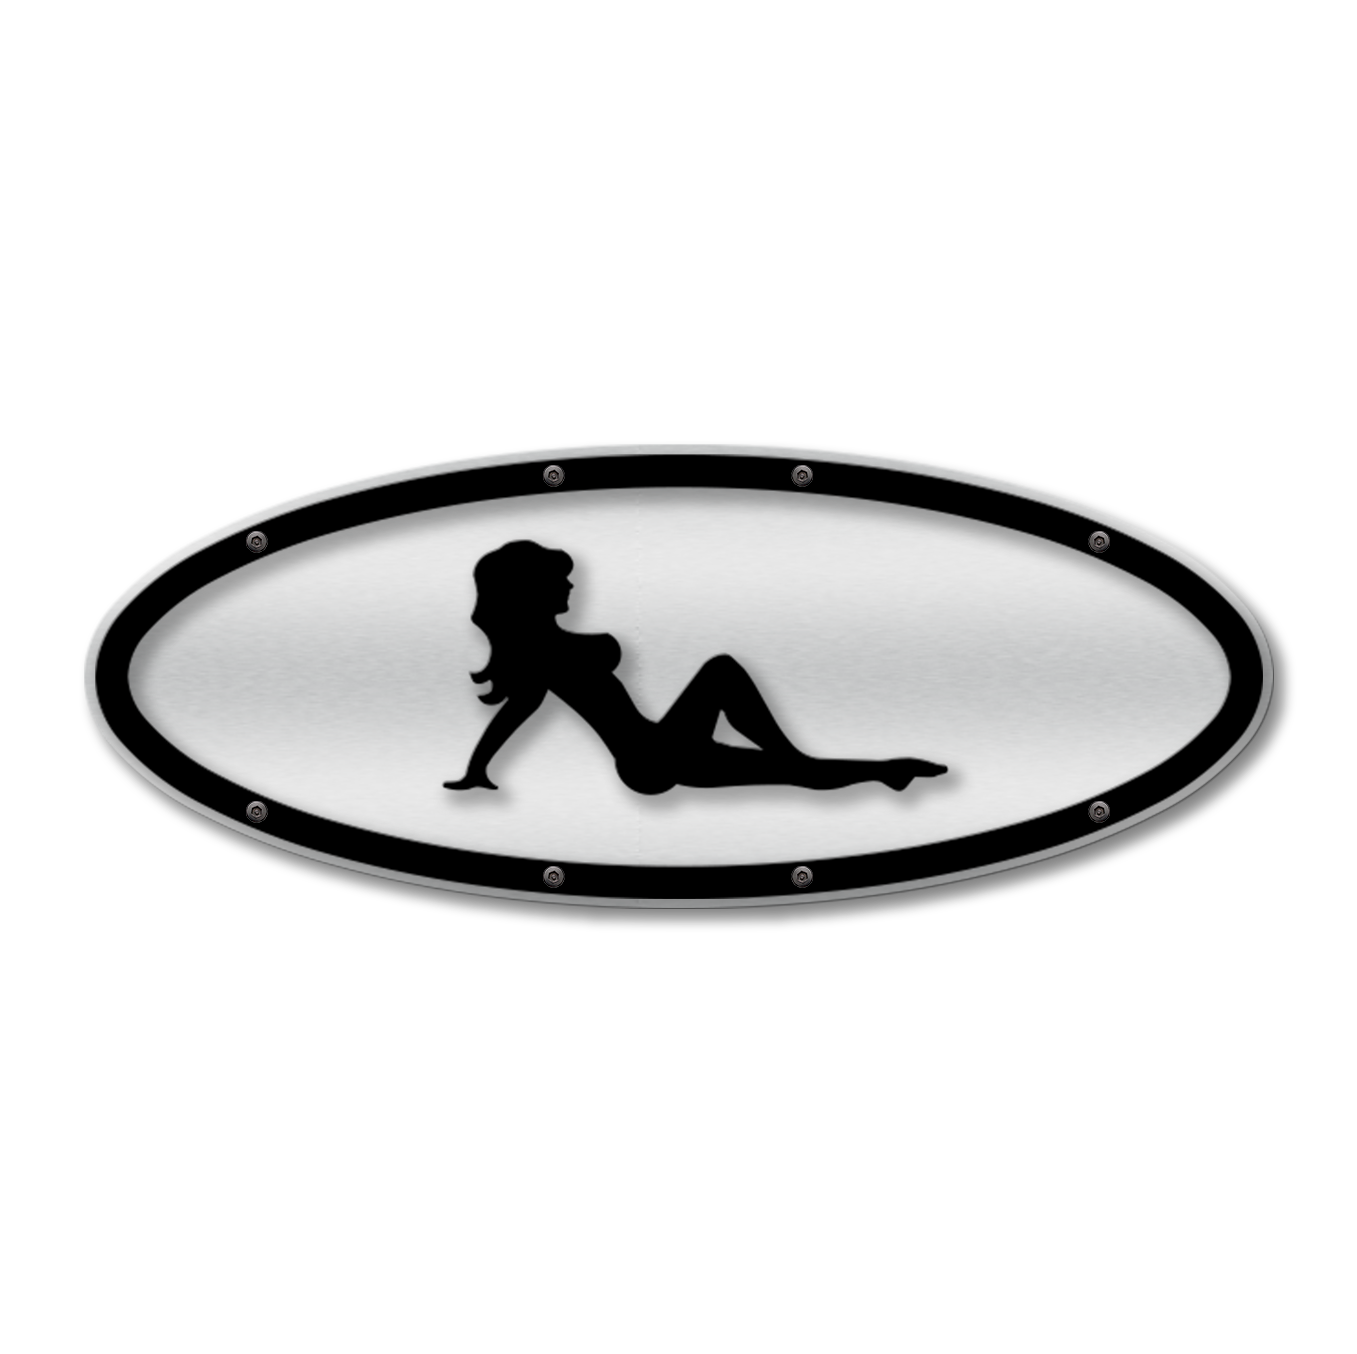 Model Oval Replacement - Fits Multiple Ford® Trucks - Fully Customizable Colors